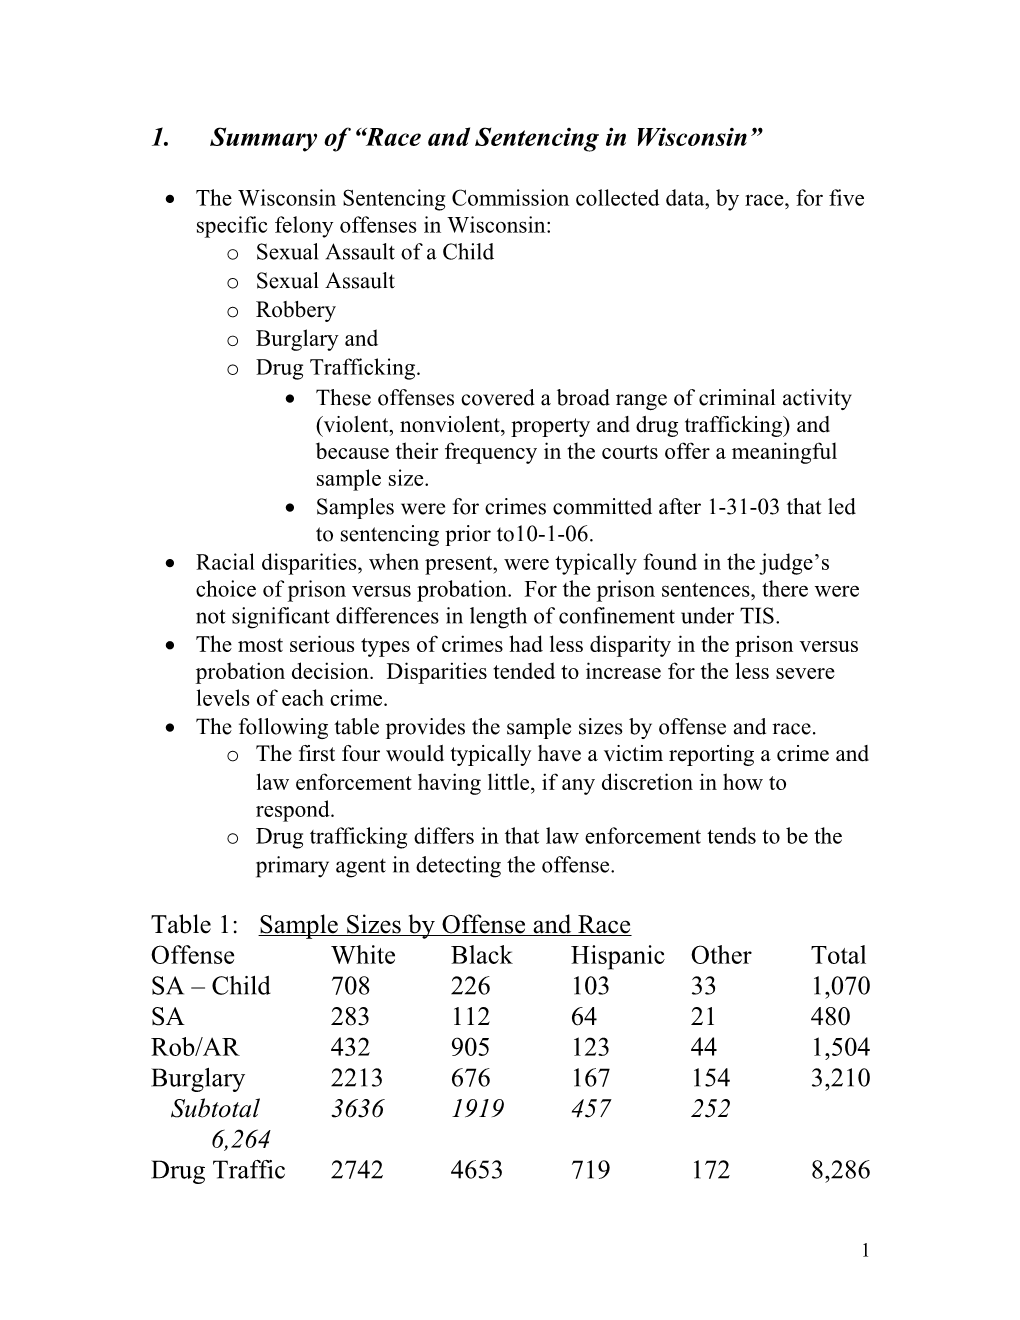 Summary of Race and Sentencing in Wisconsin